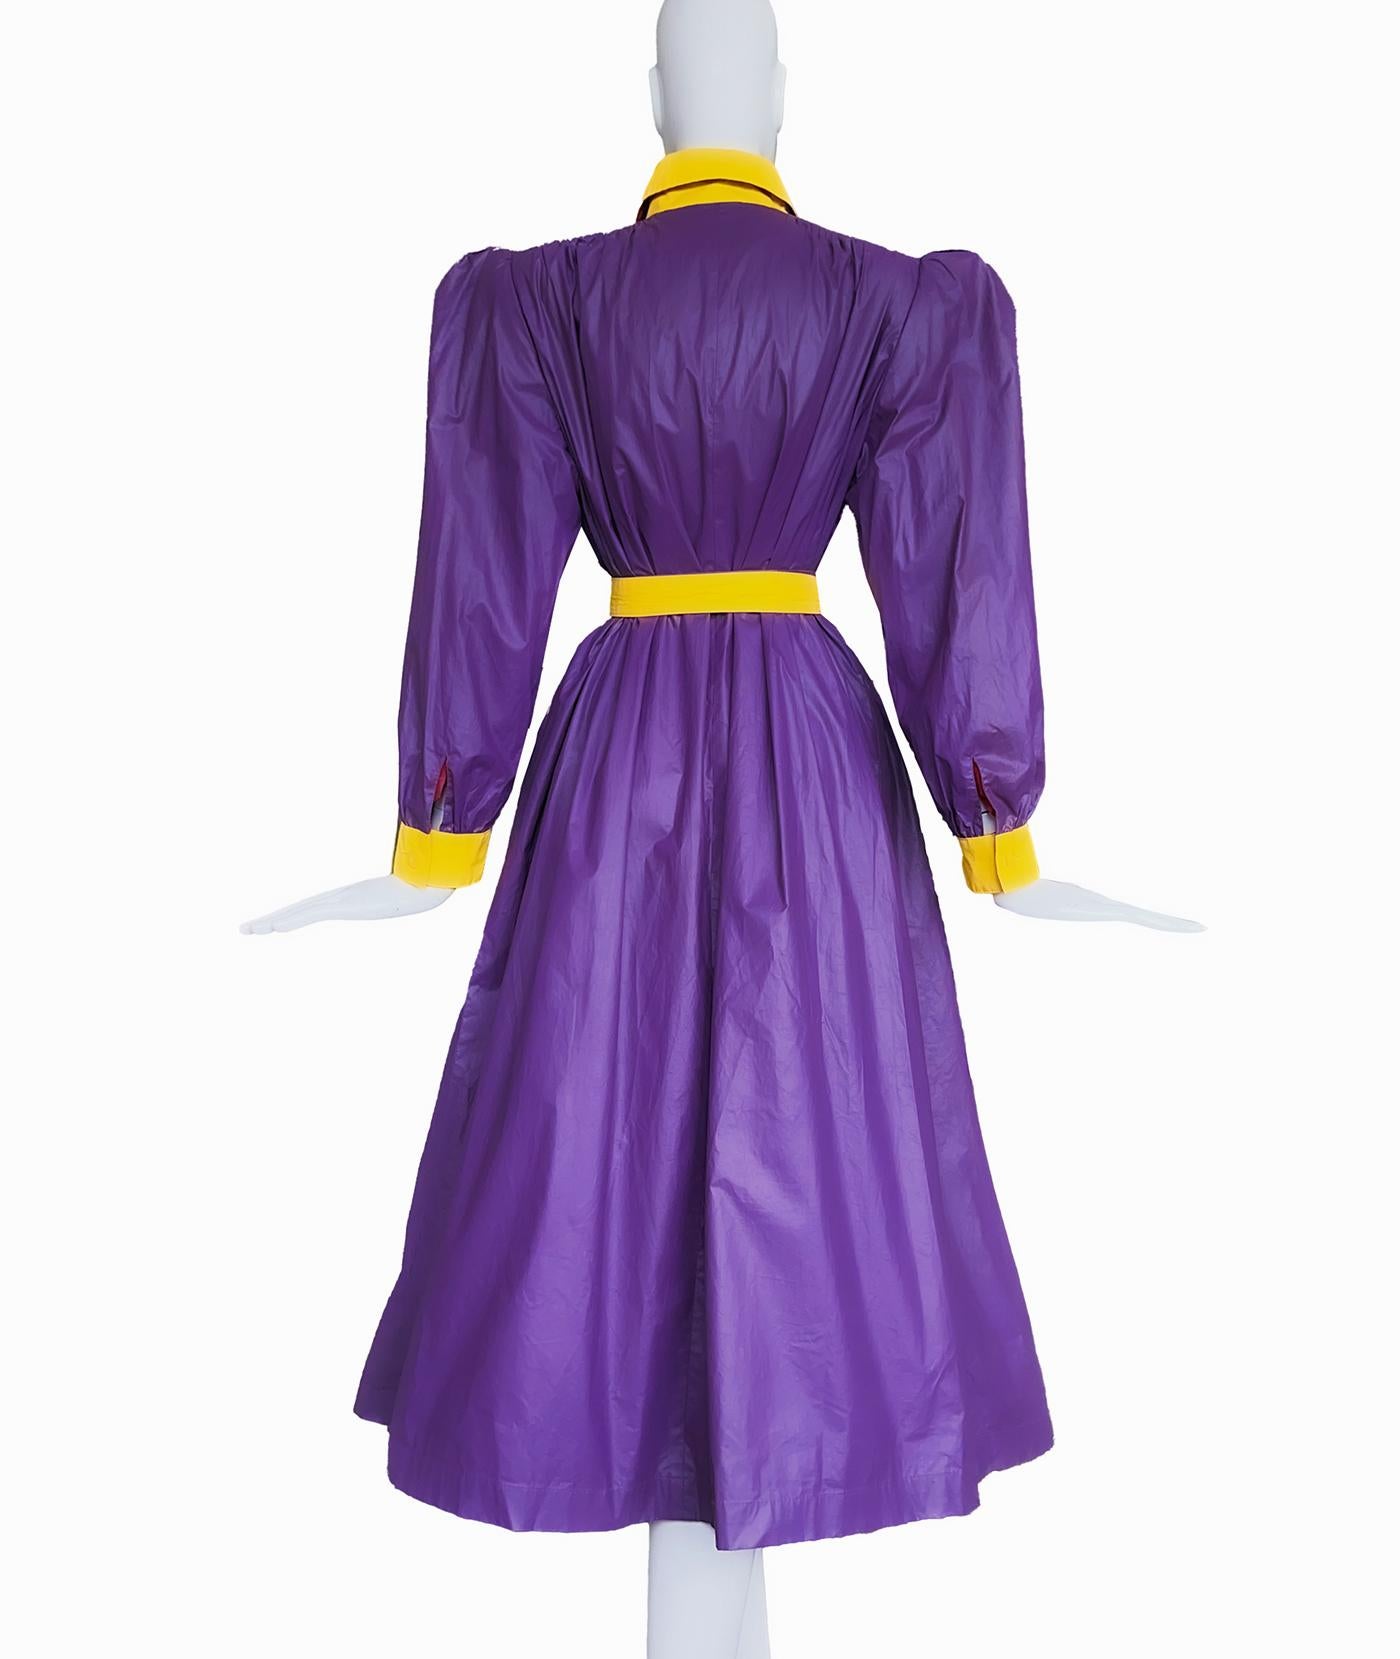 Stunning Valentino Raincoat. Love these colours! Purple/violet and yellow, definitely Gucci vibes, a super rare and extraordinairy piece. 
Puff Shoulders, yellow collar and cuffs. Closes with hidden buttons. 
Rare vintage piece, assuming late 80s.-